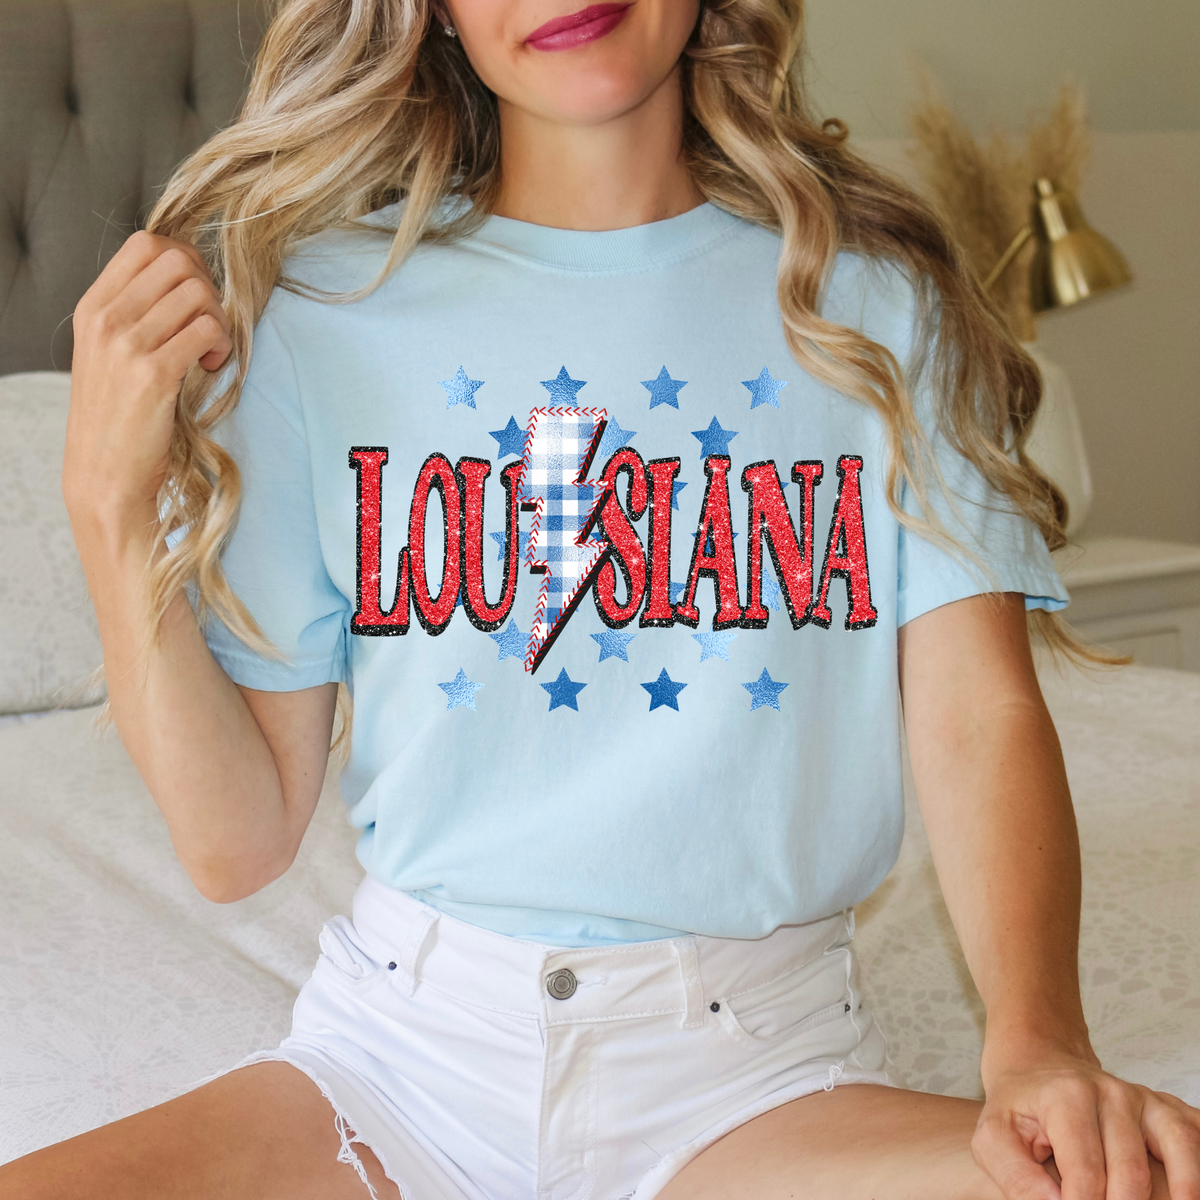 Louisiana Glitter with Foil Stars & Gingham Stitched Bolt in Red, White & Blue Patriotic Digital Design, PNG